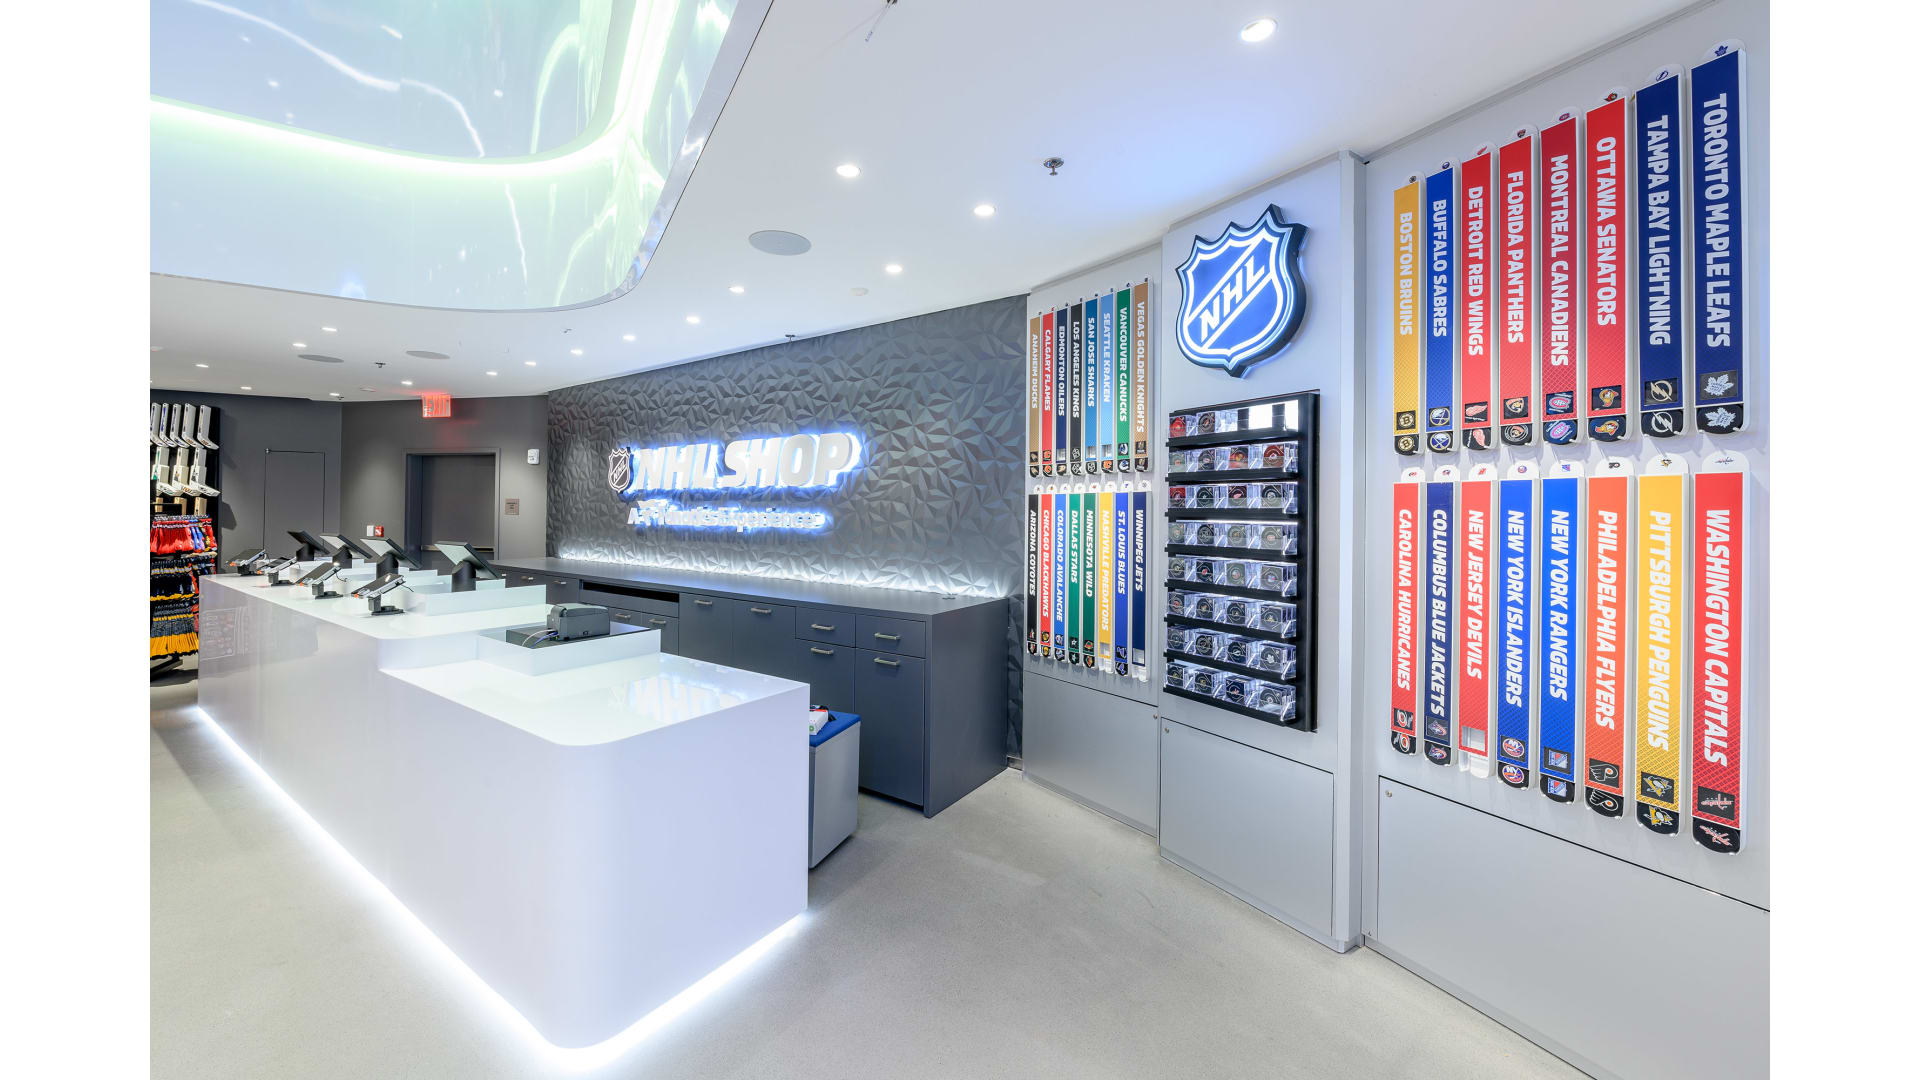 The NHL Store in New York City, for hockey fans 